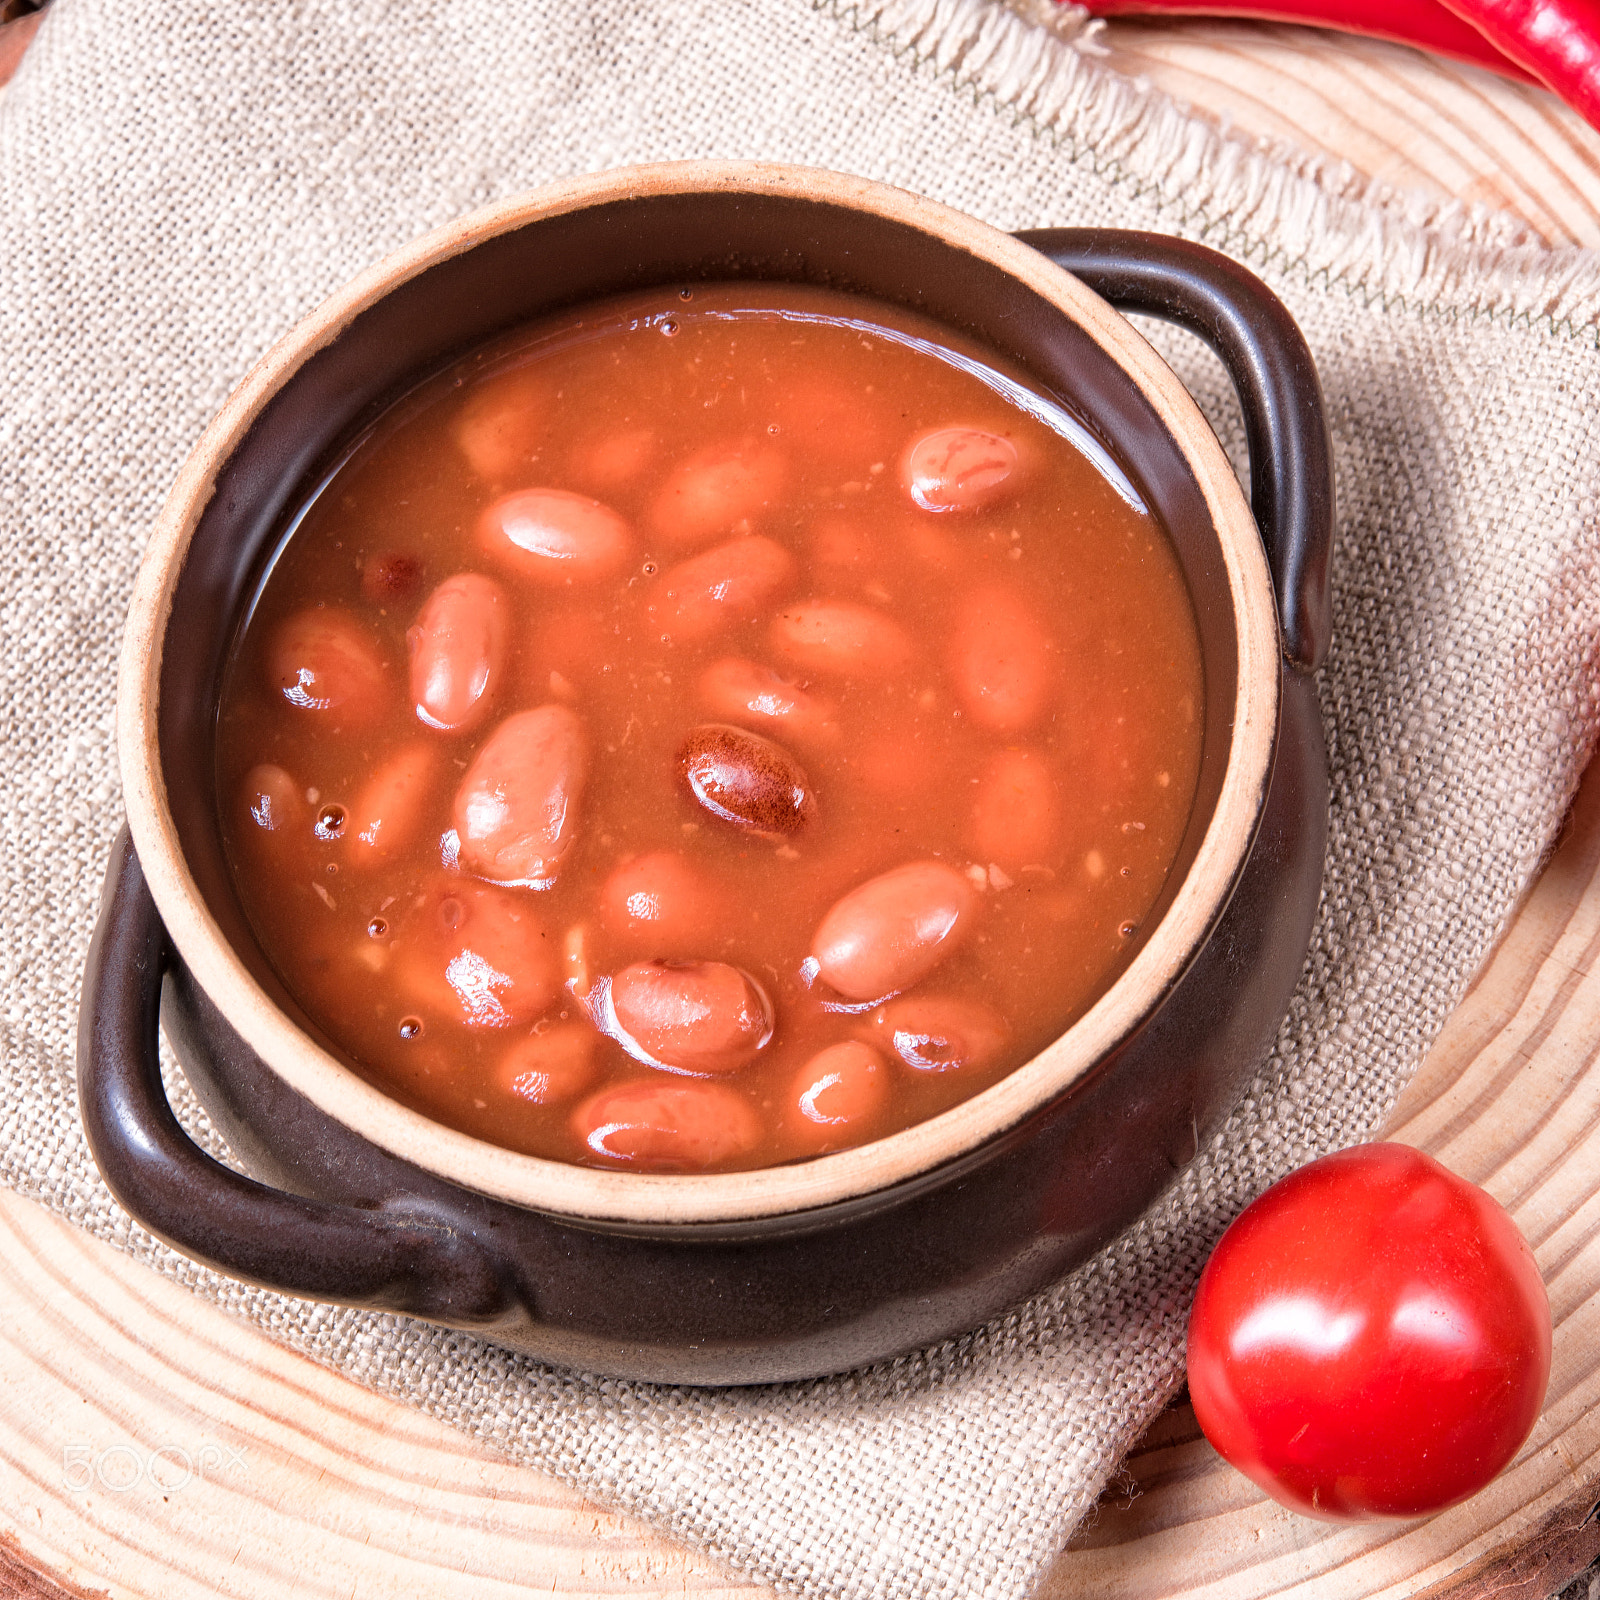 Nikon D810 sample photo. Baked beans in tomato photography